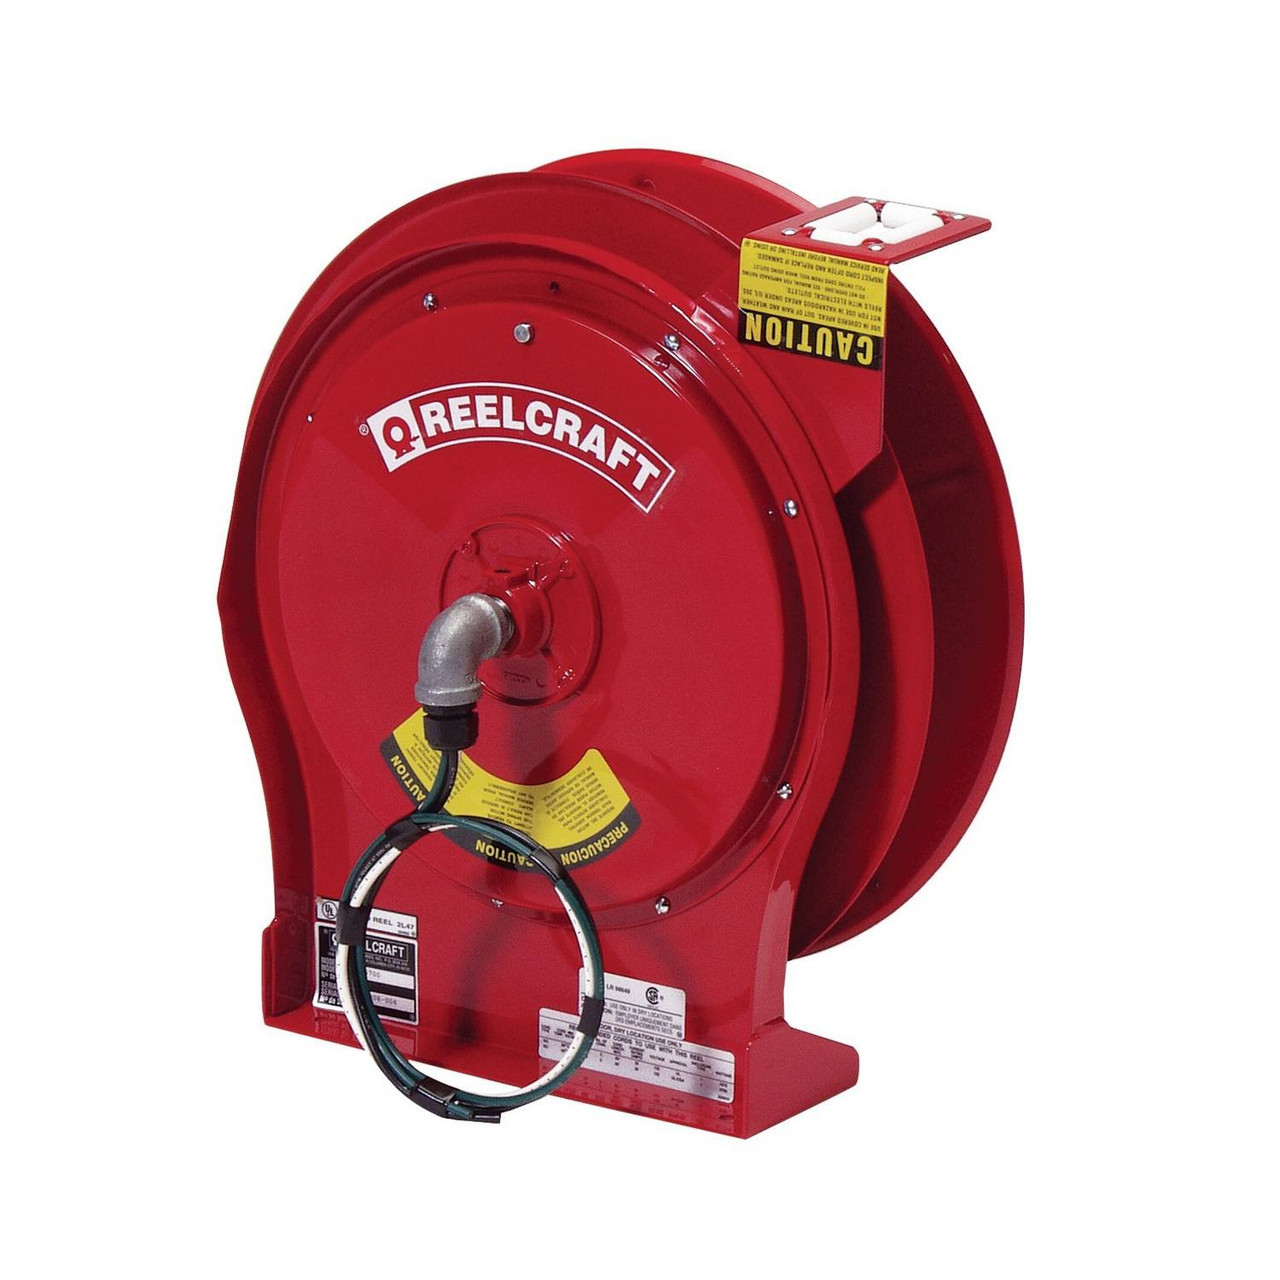 Reelcraft L 5700 Heavy Duty Power Cord Reel | 125 Volt / 30 Amp | 50 Ft.  Cable Length | Reel Without Cord